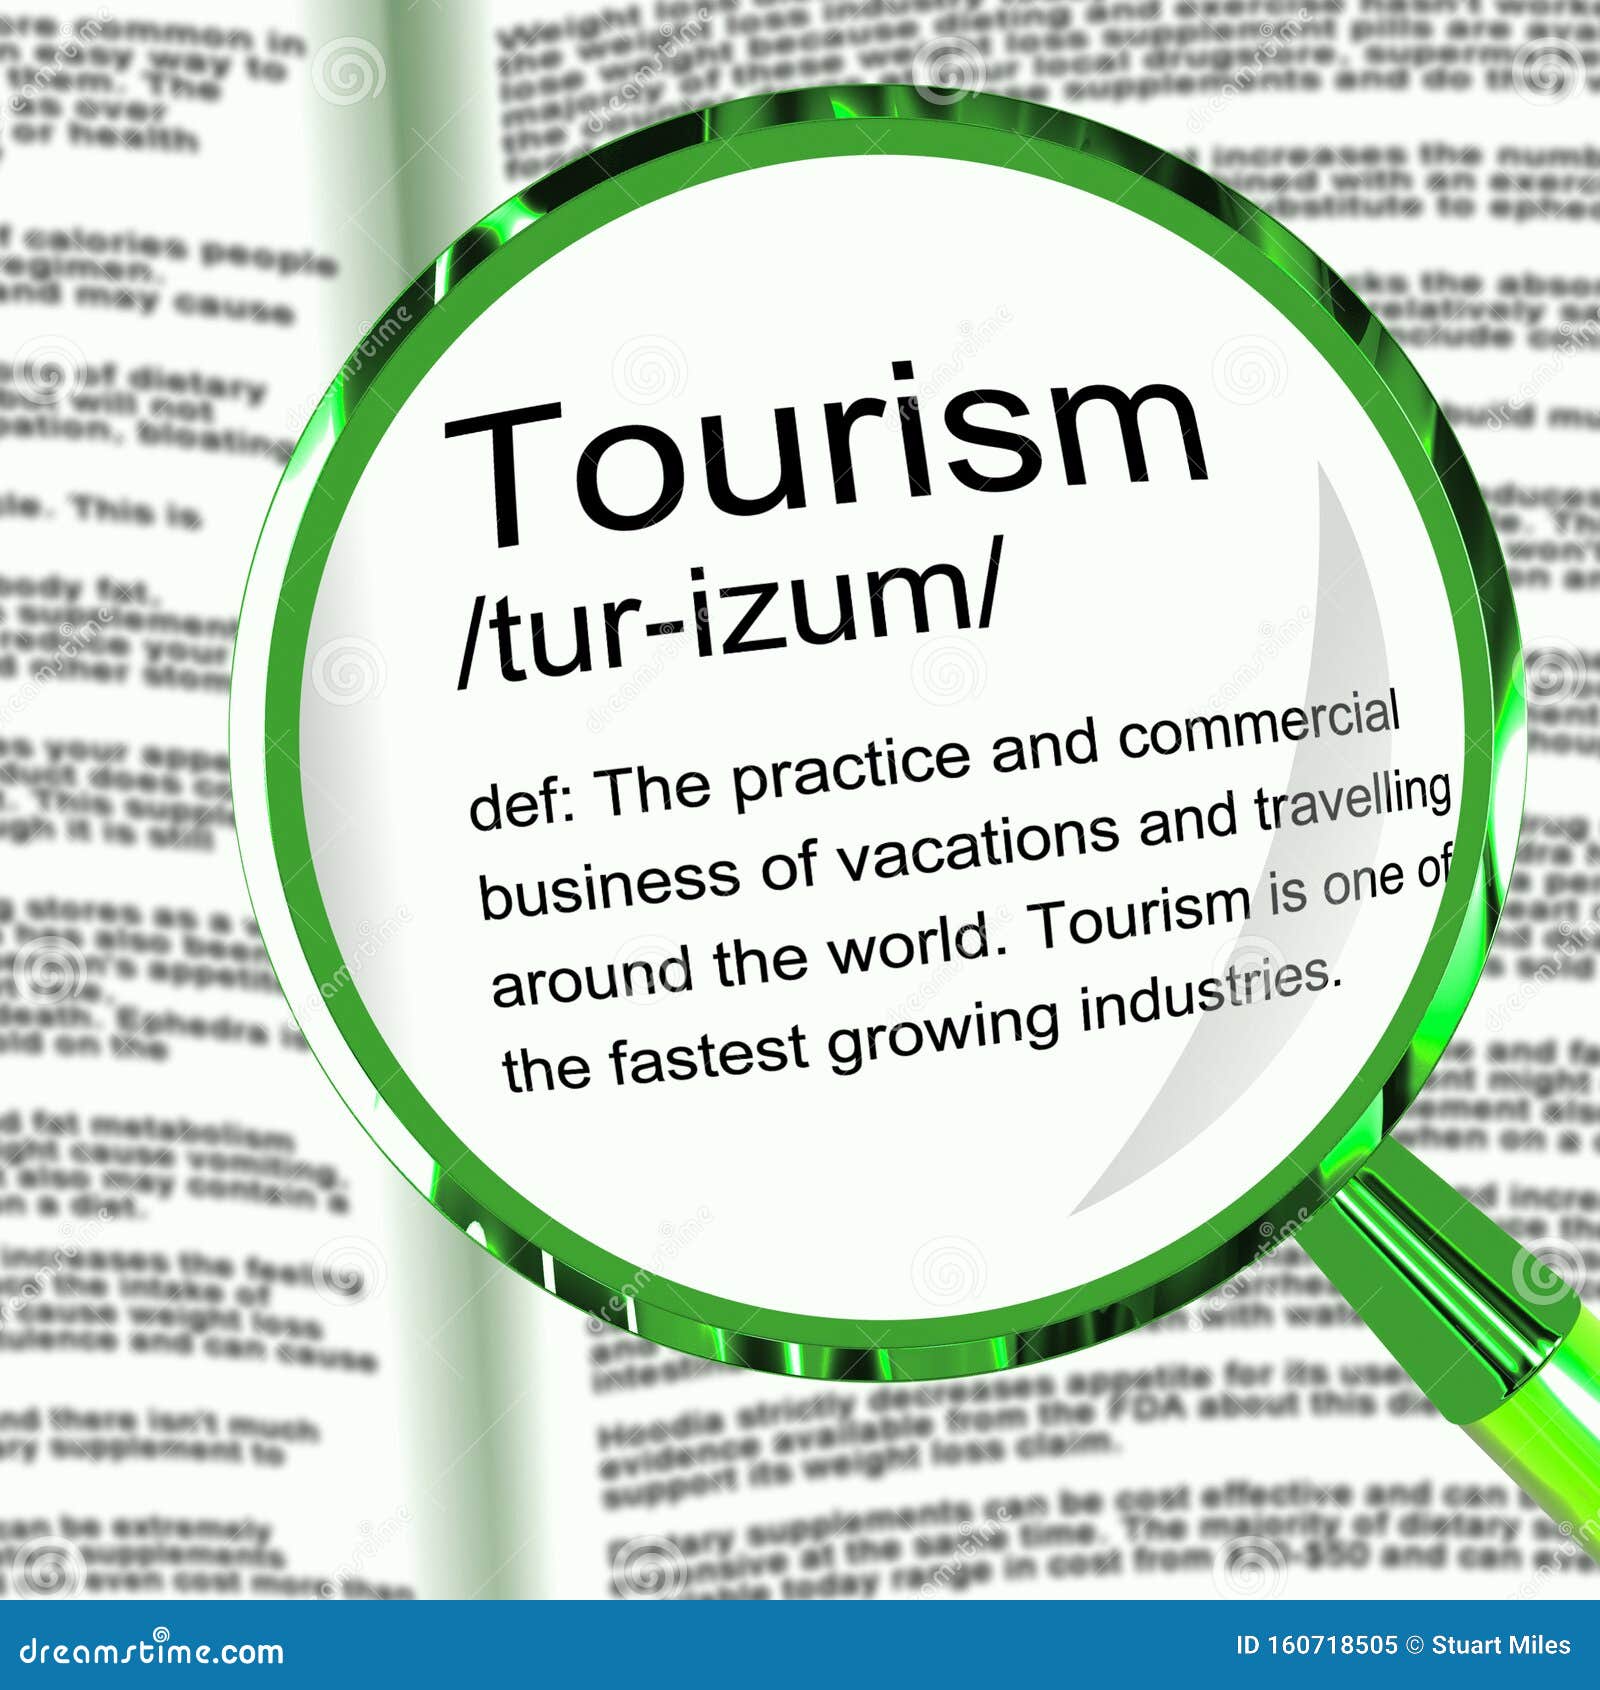 what does tourism mean